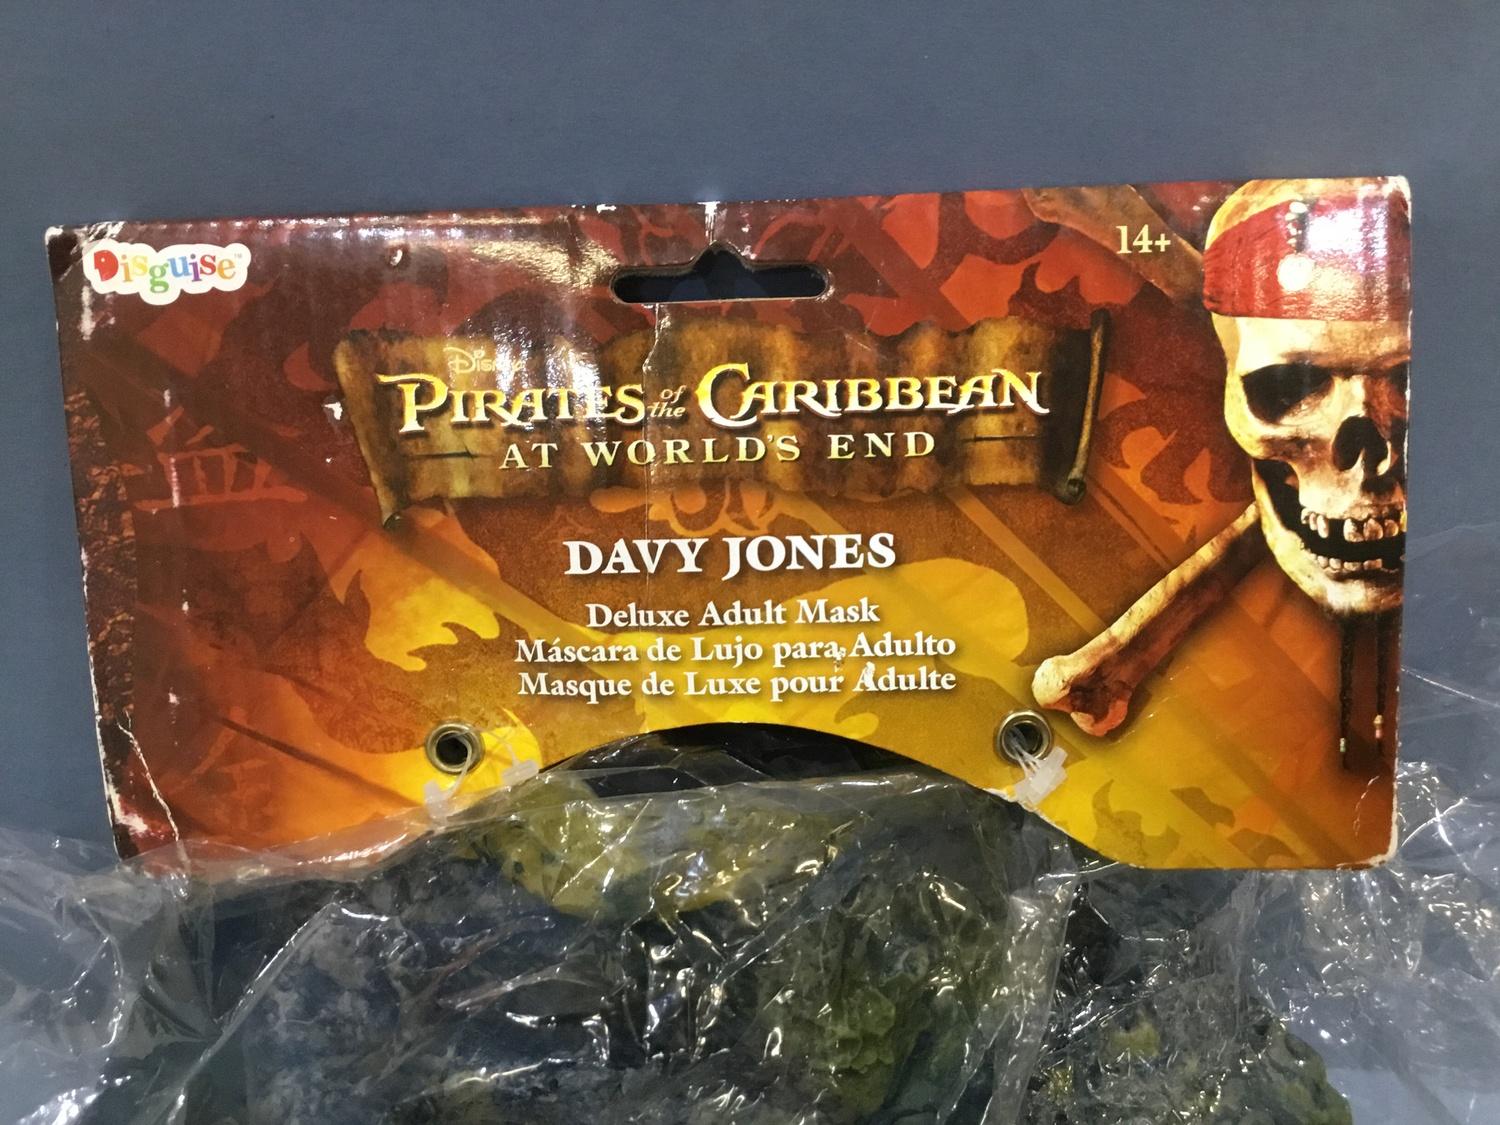 252 - Pirates Of The Caribbean Davy Jones Deluxe Adult Mask - Image 2 of 2